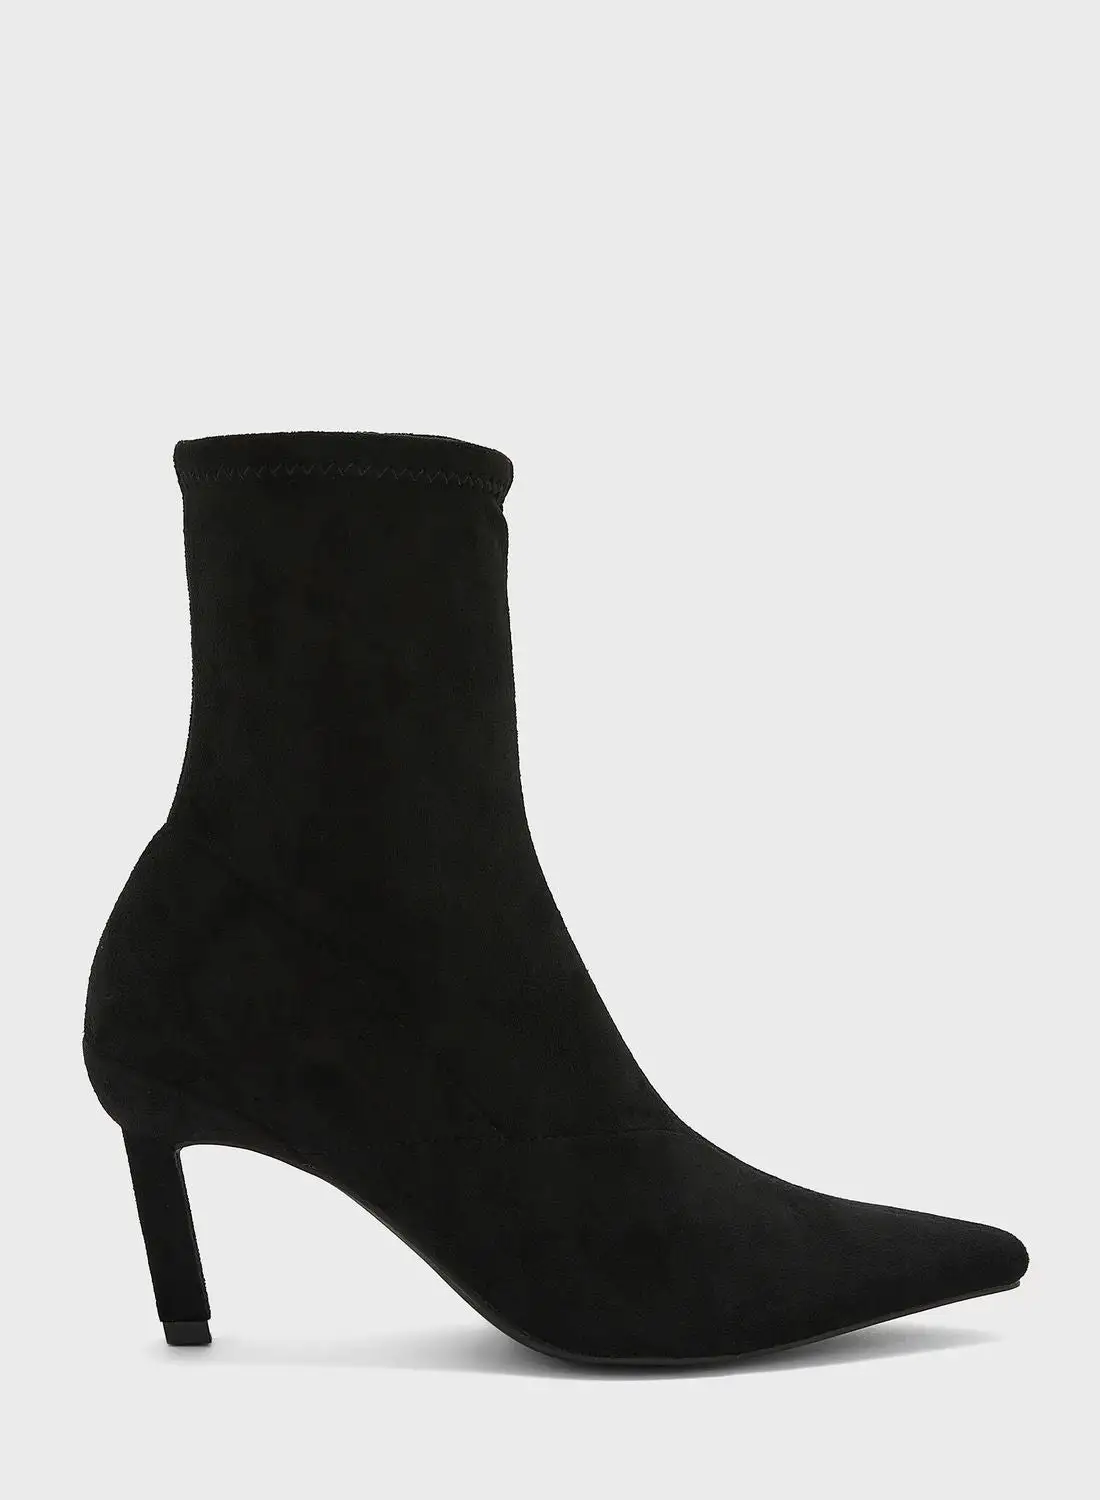 TOPSHOP Olive Ankle Boots